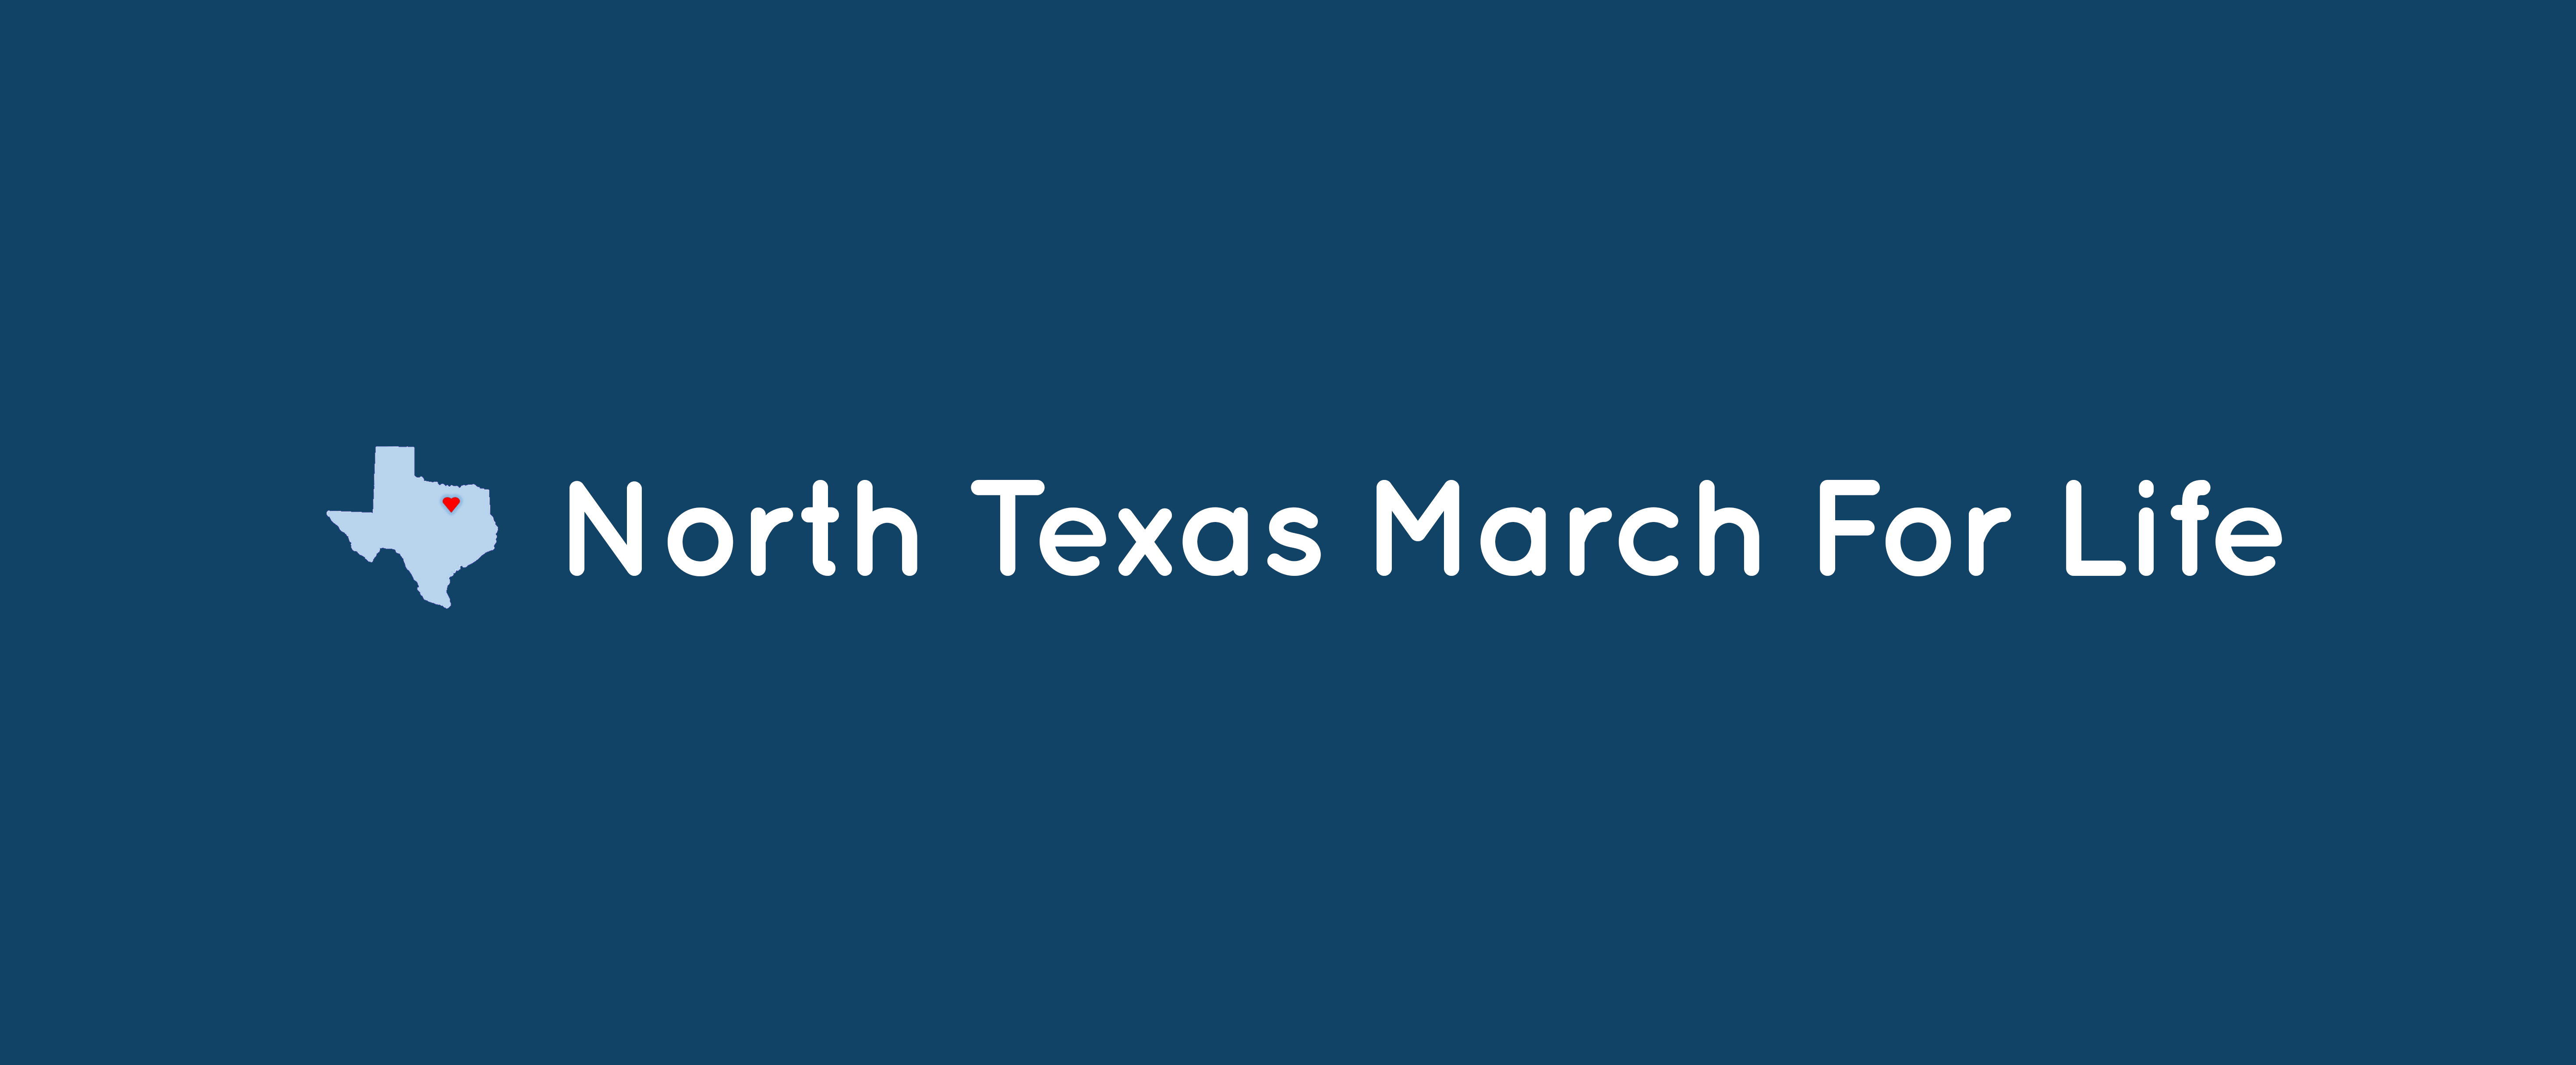 NTX-march-website-banner.png